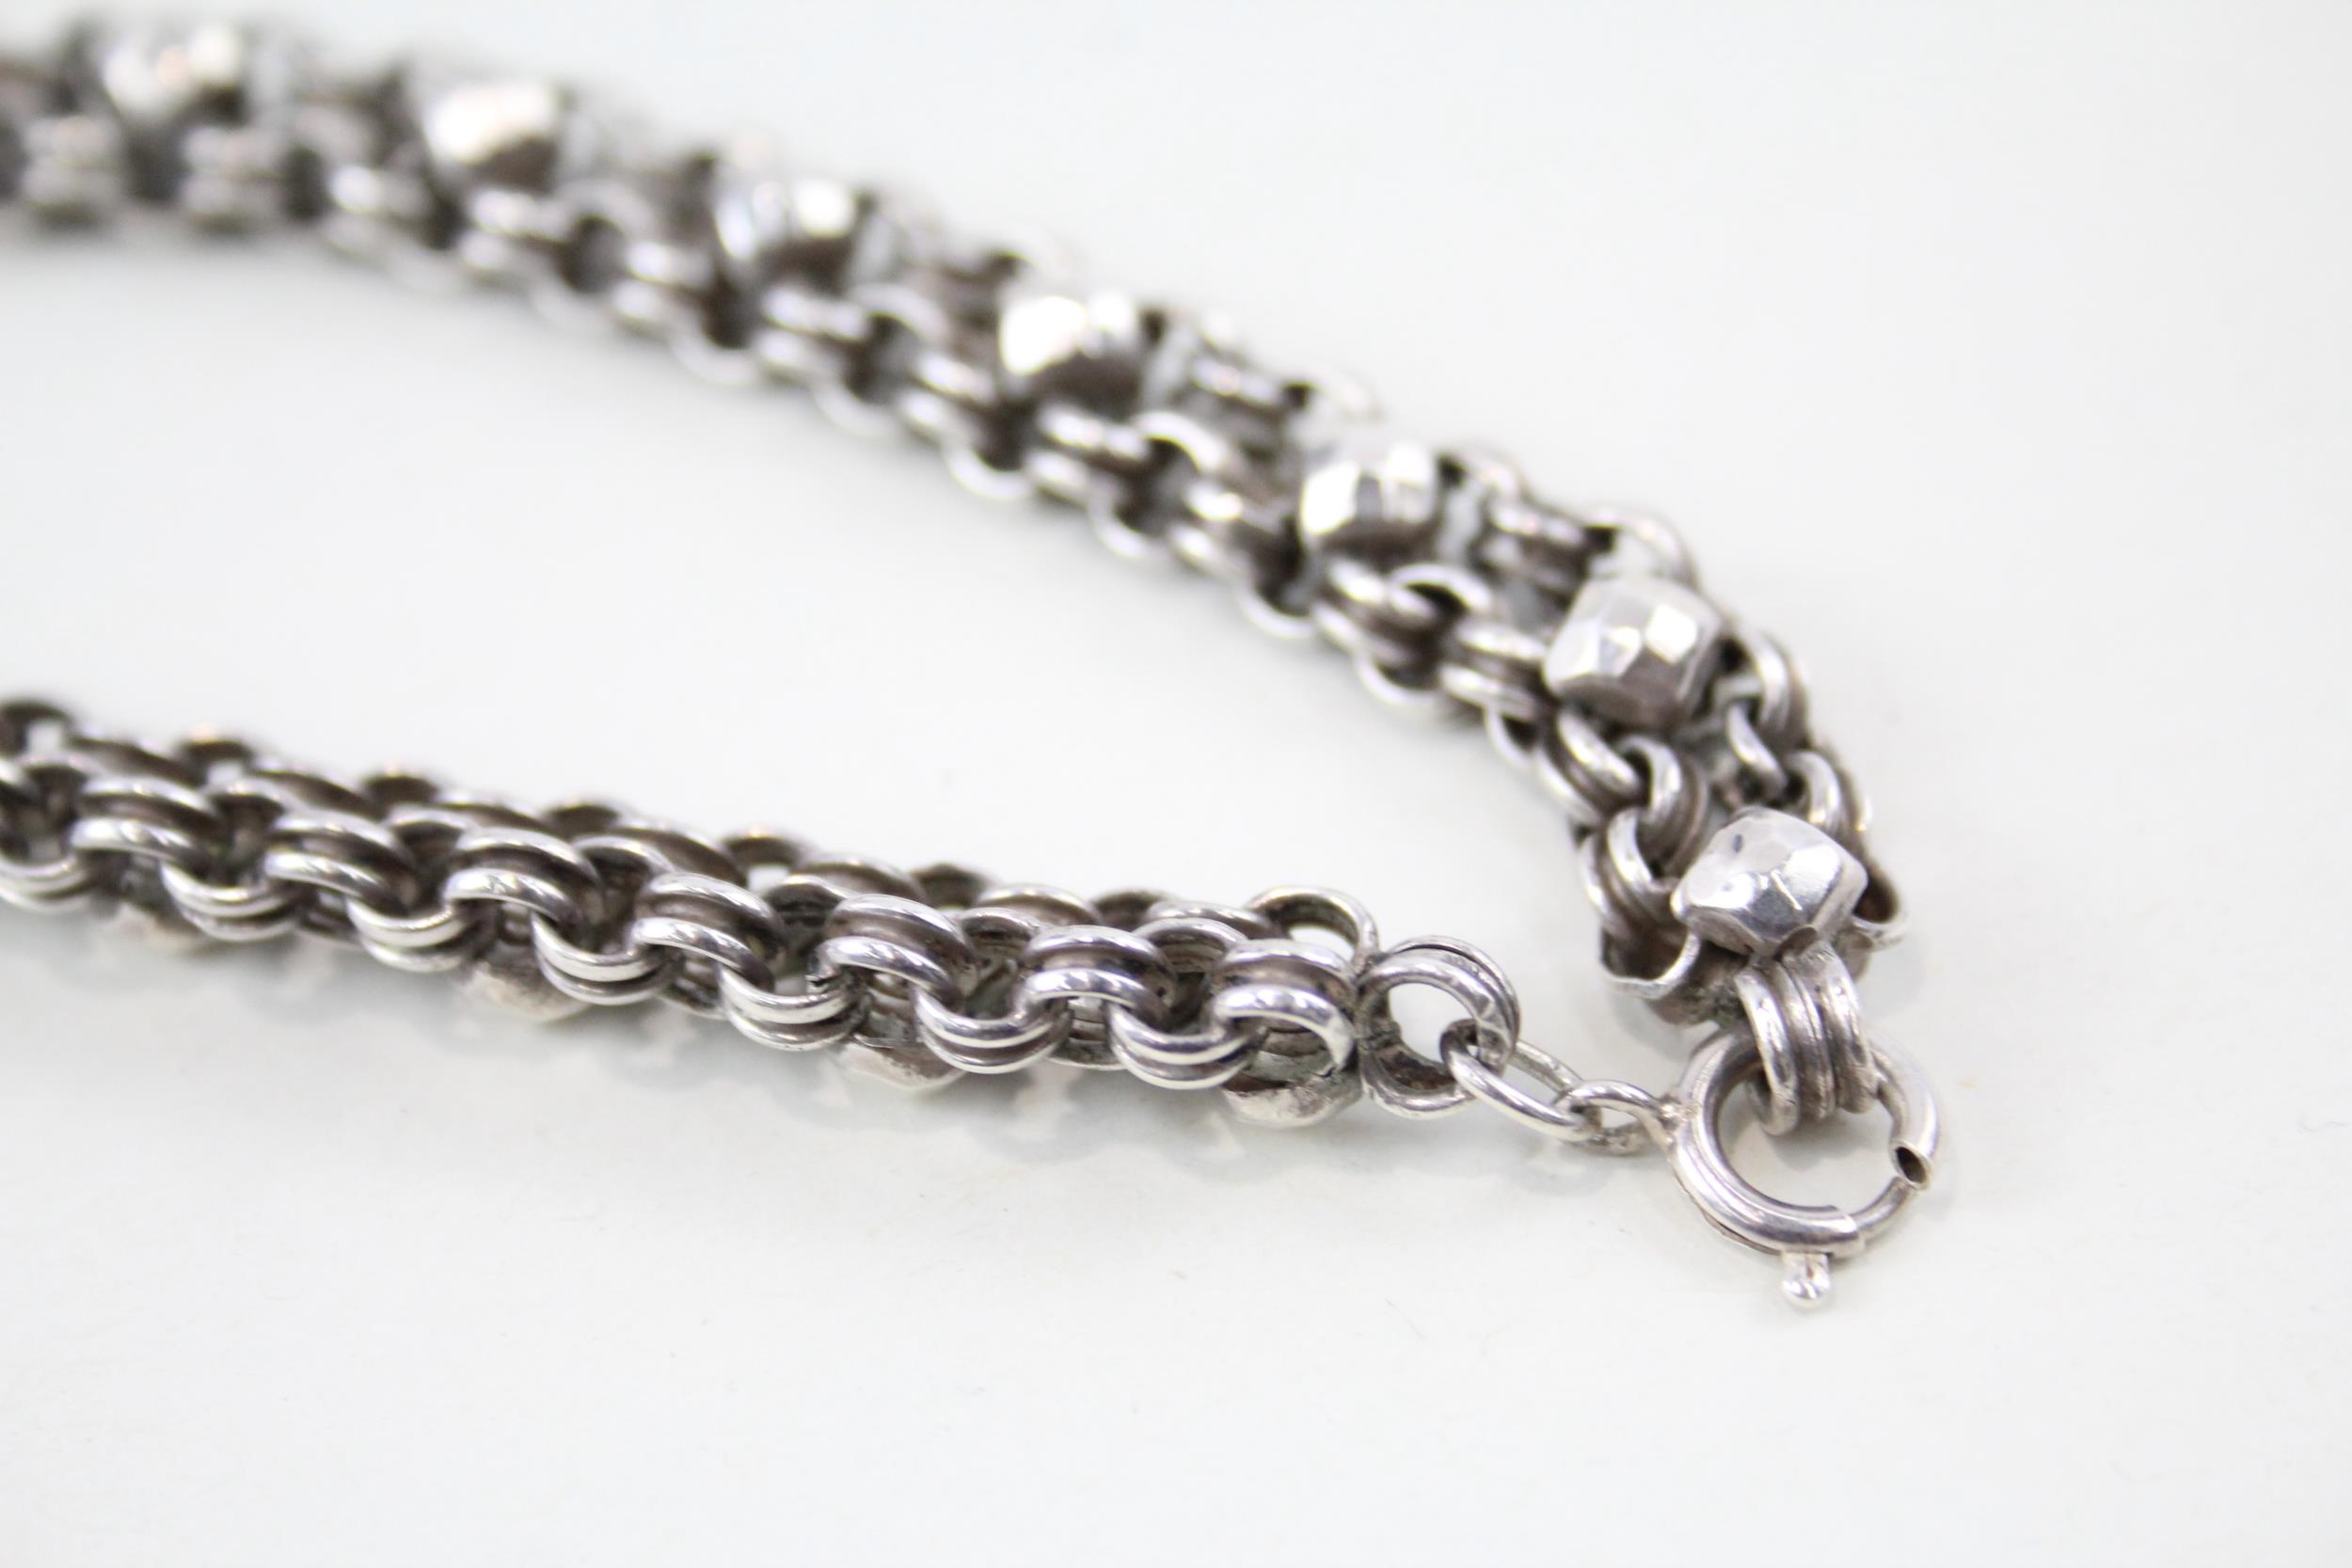 Silver antique fancy link chain necklace (26g) - Image 3 of 3